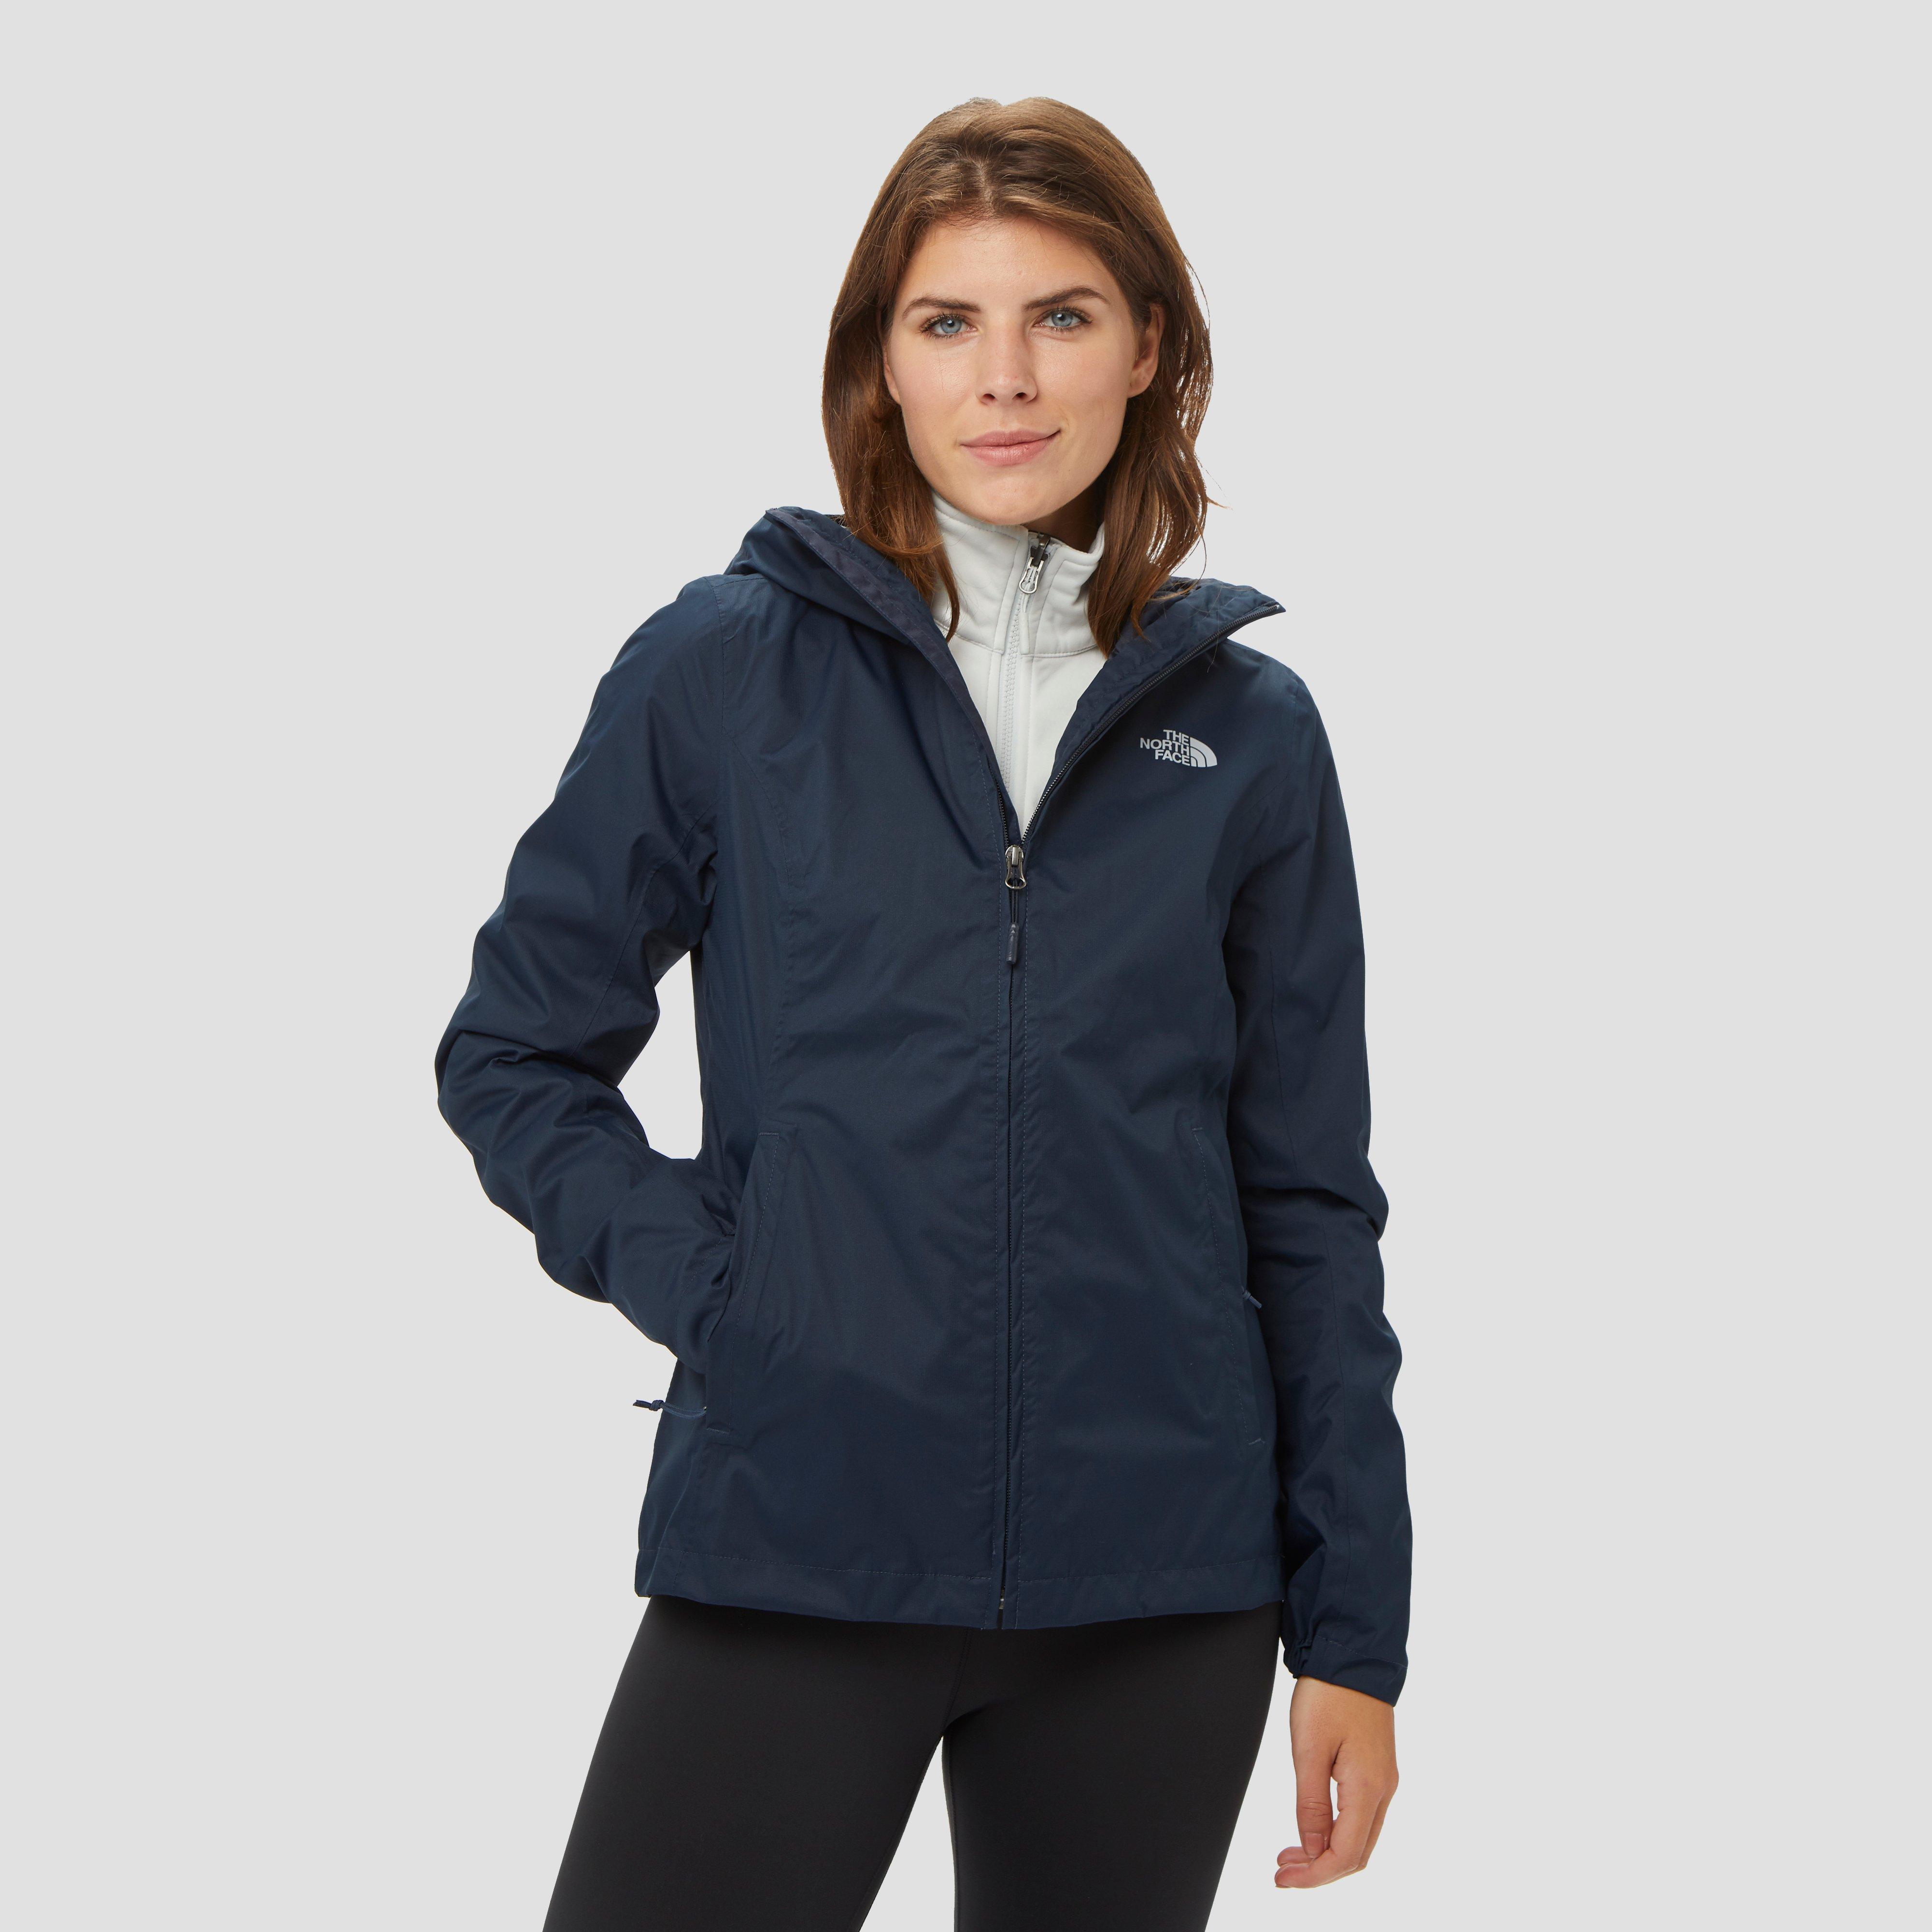 north face tanken triclimate jacket